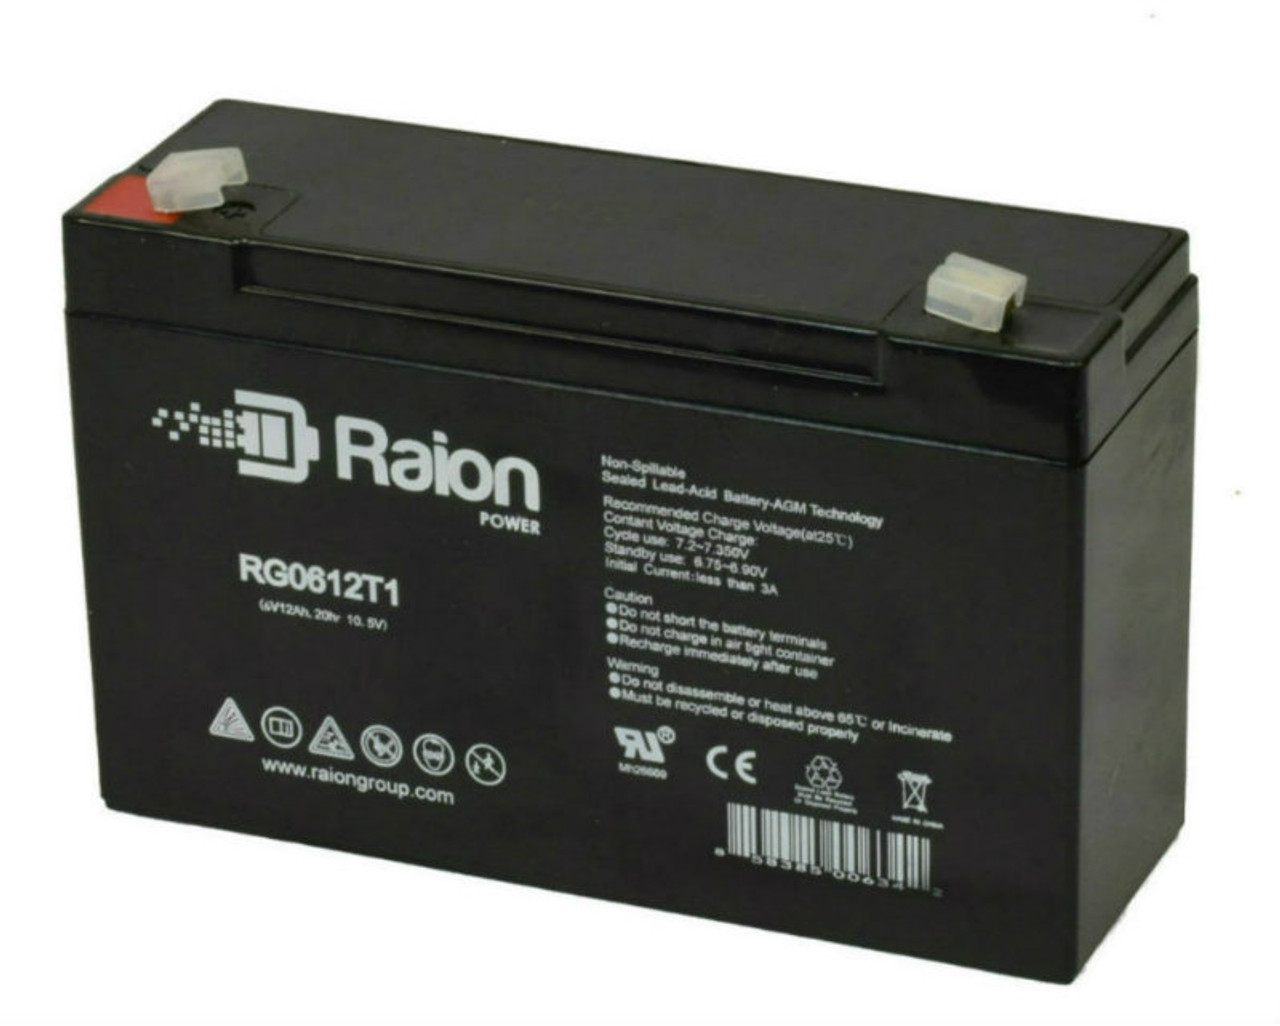 Raion Power RG06120T1 Replacement Battery for Enersys NP10-6-F2